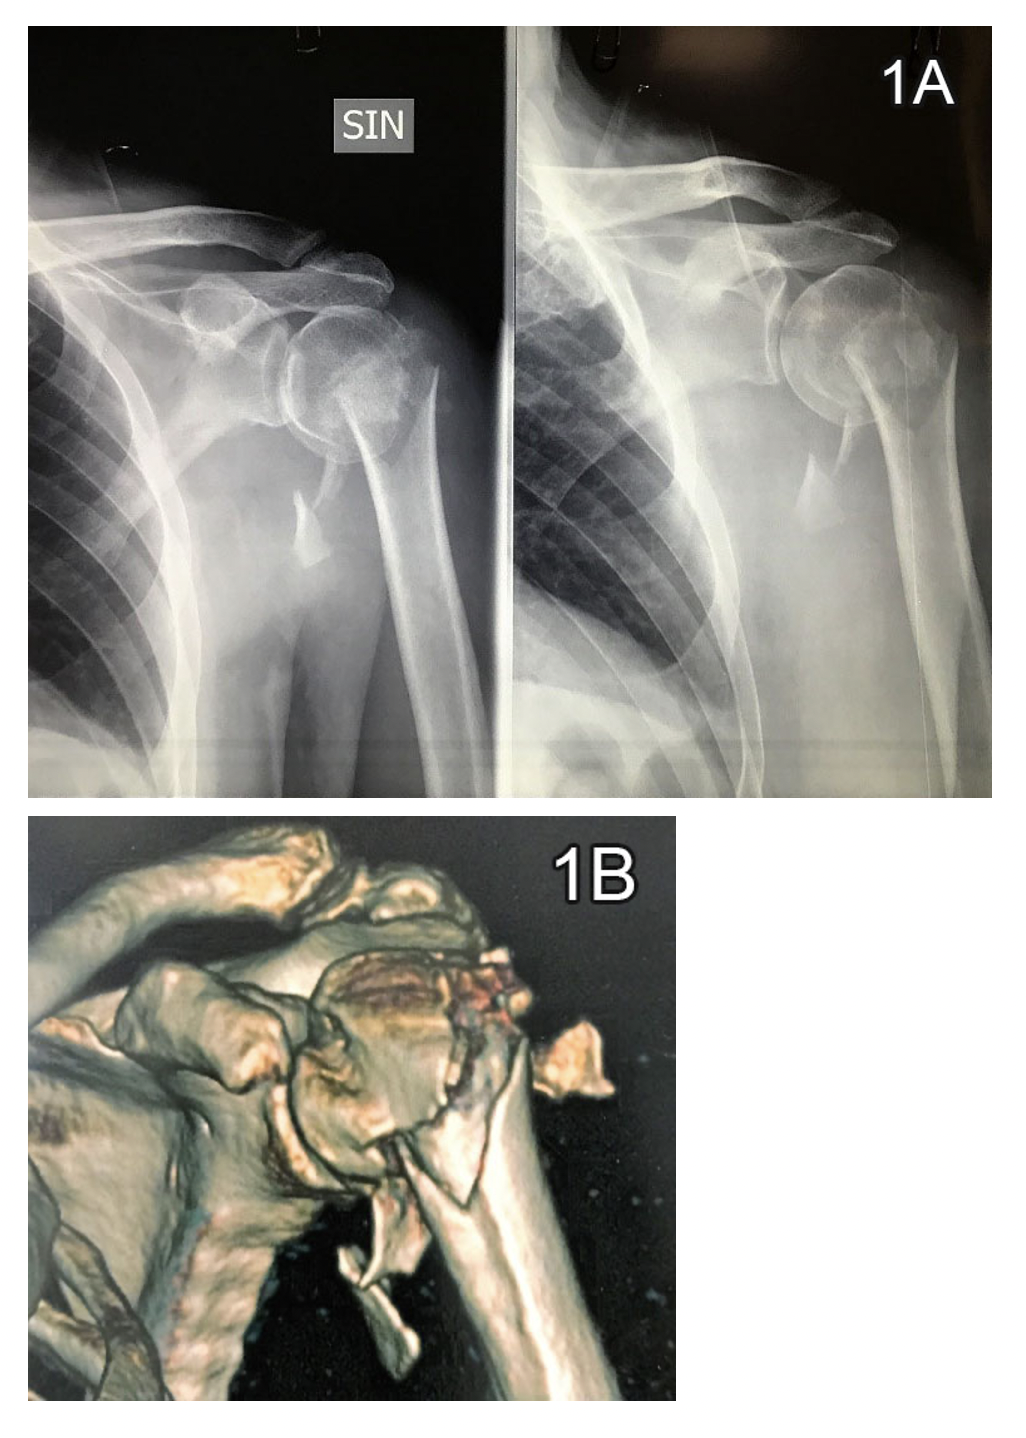 comminuted proximal humerus fracture